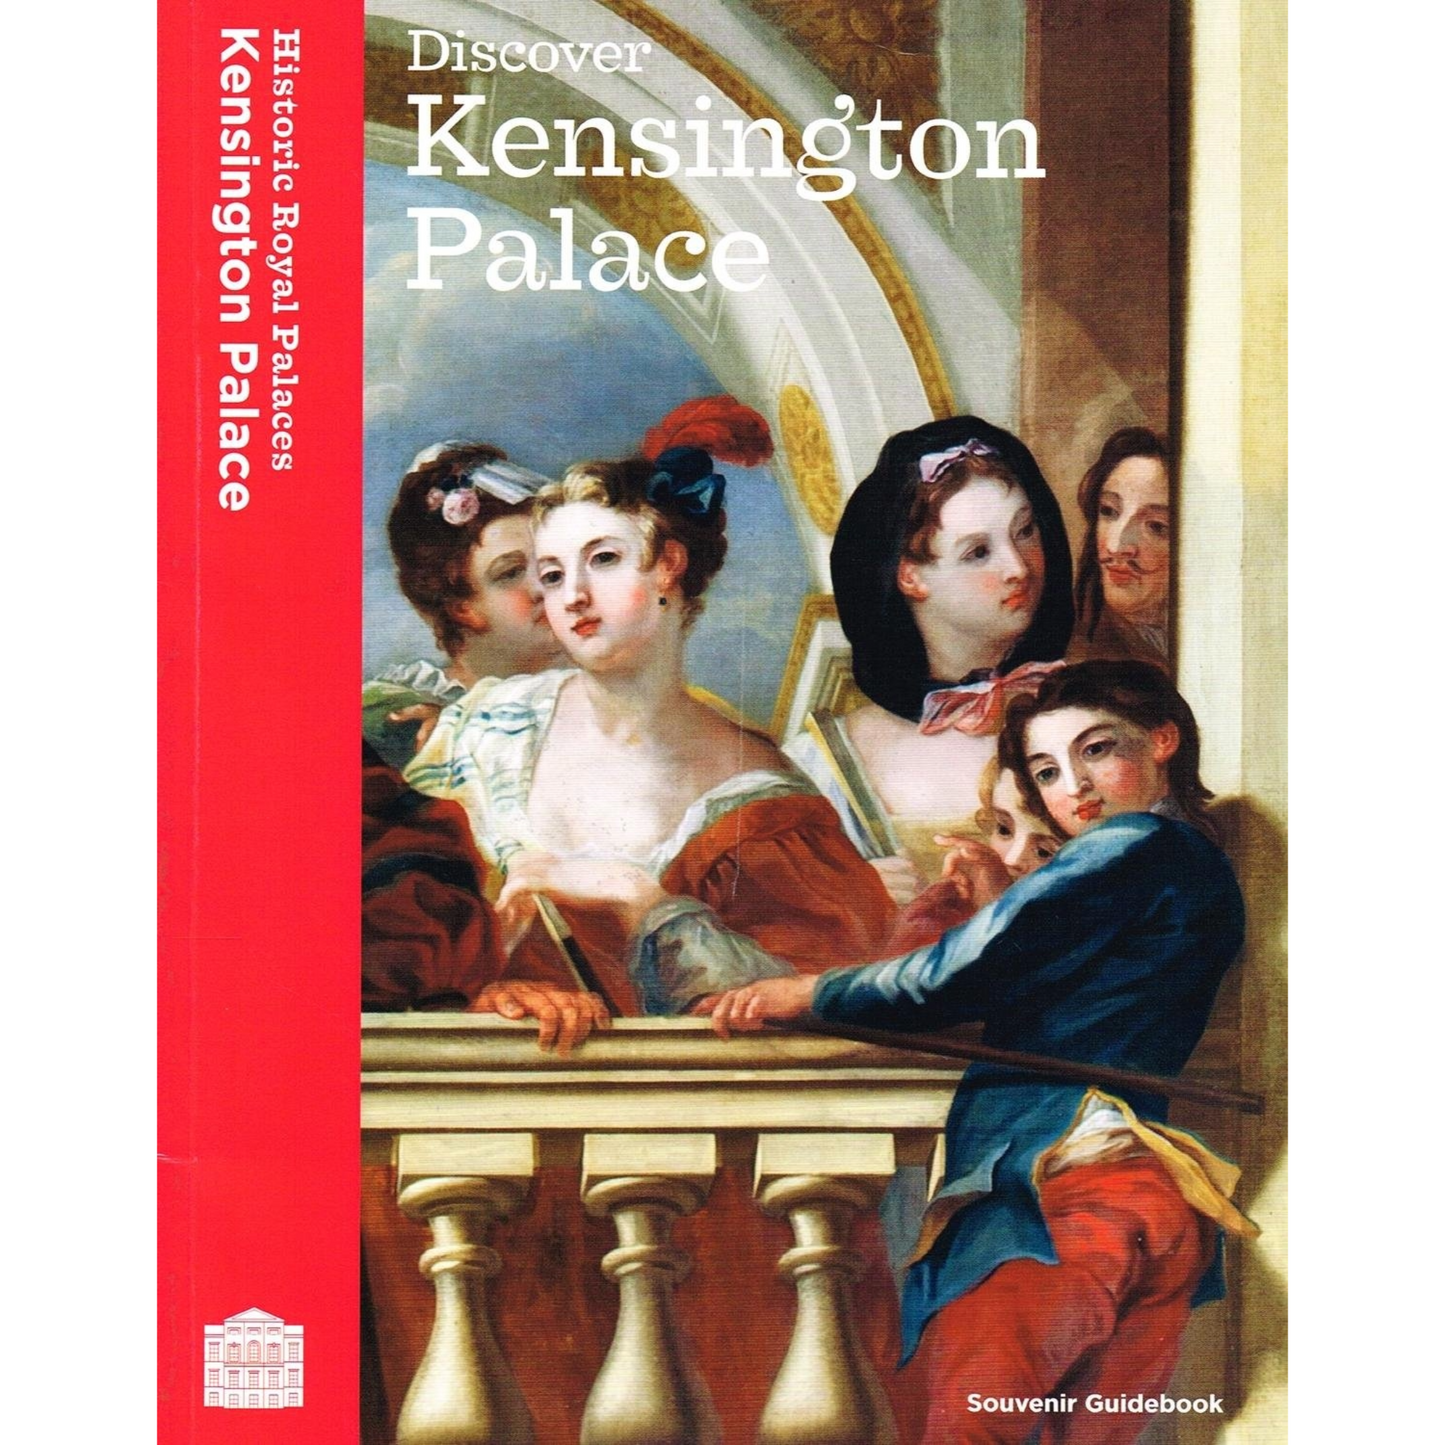 Discover Kensington Palace by Clare Dorman, Margaret and 7 Others. Edited by Murphy | Jan 1, 2012